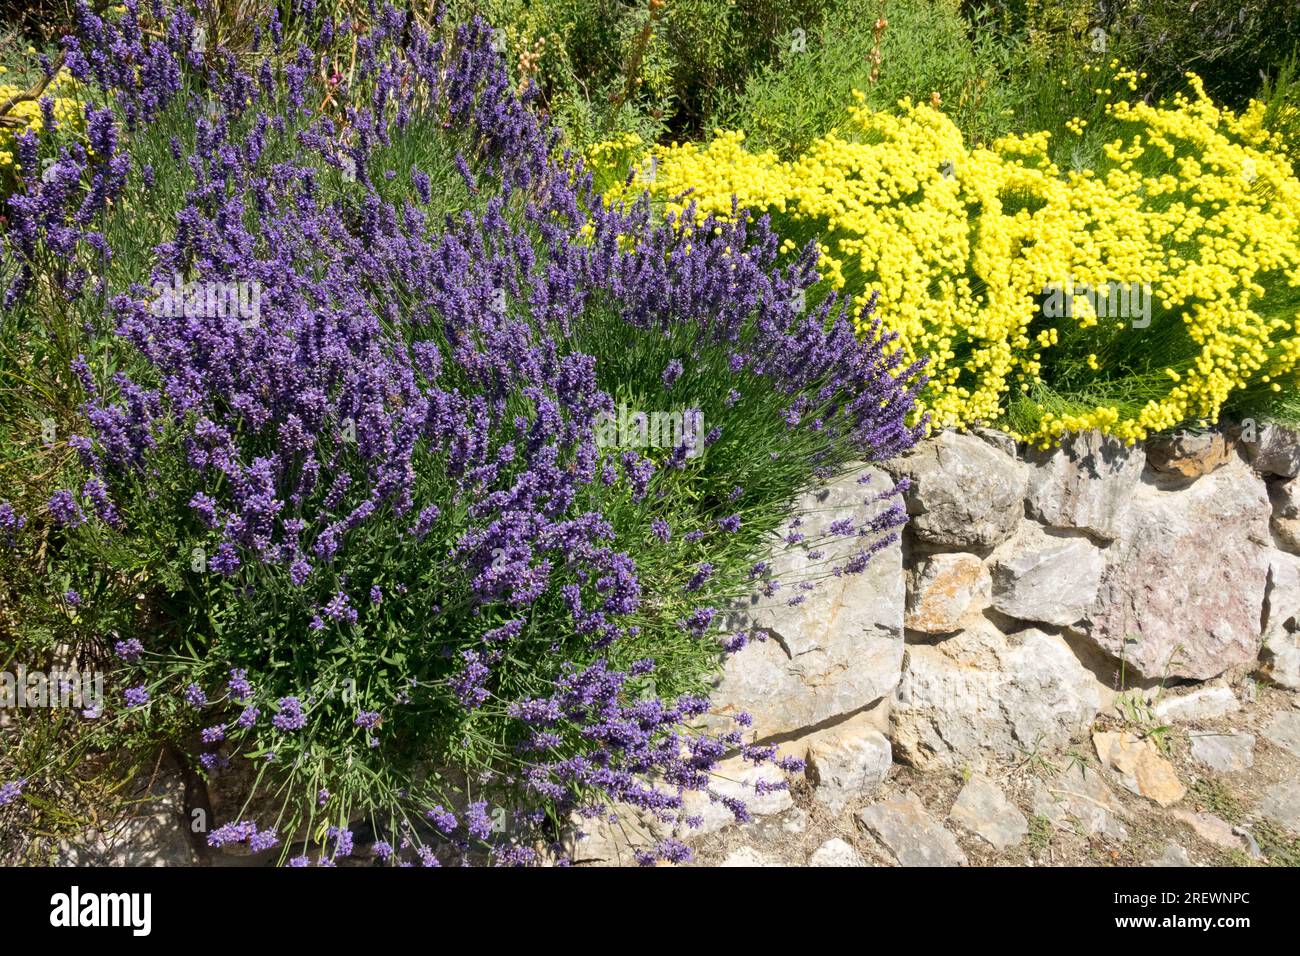 Lavender in the garden, Lavender wall, Sweet-scented, Fragrant, Plants, Stone wall, Yellow, Santolina, Garden, Wall Stock Photo